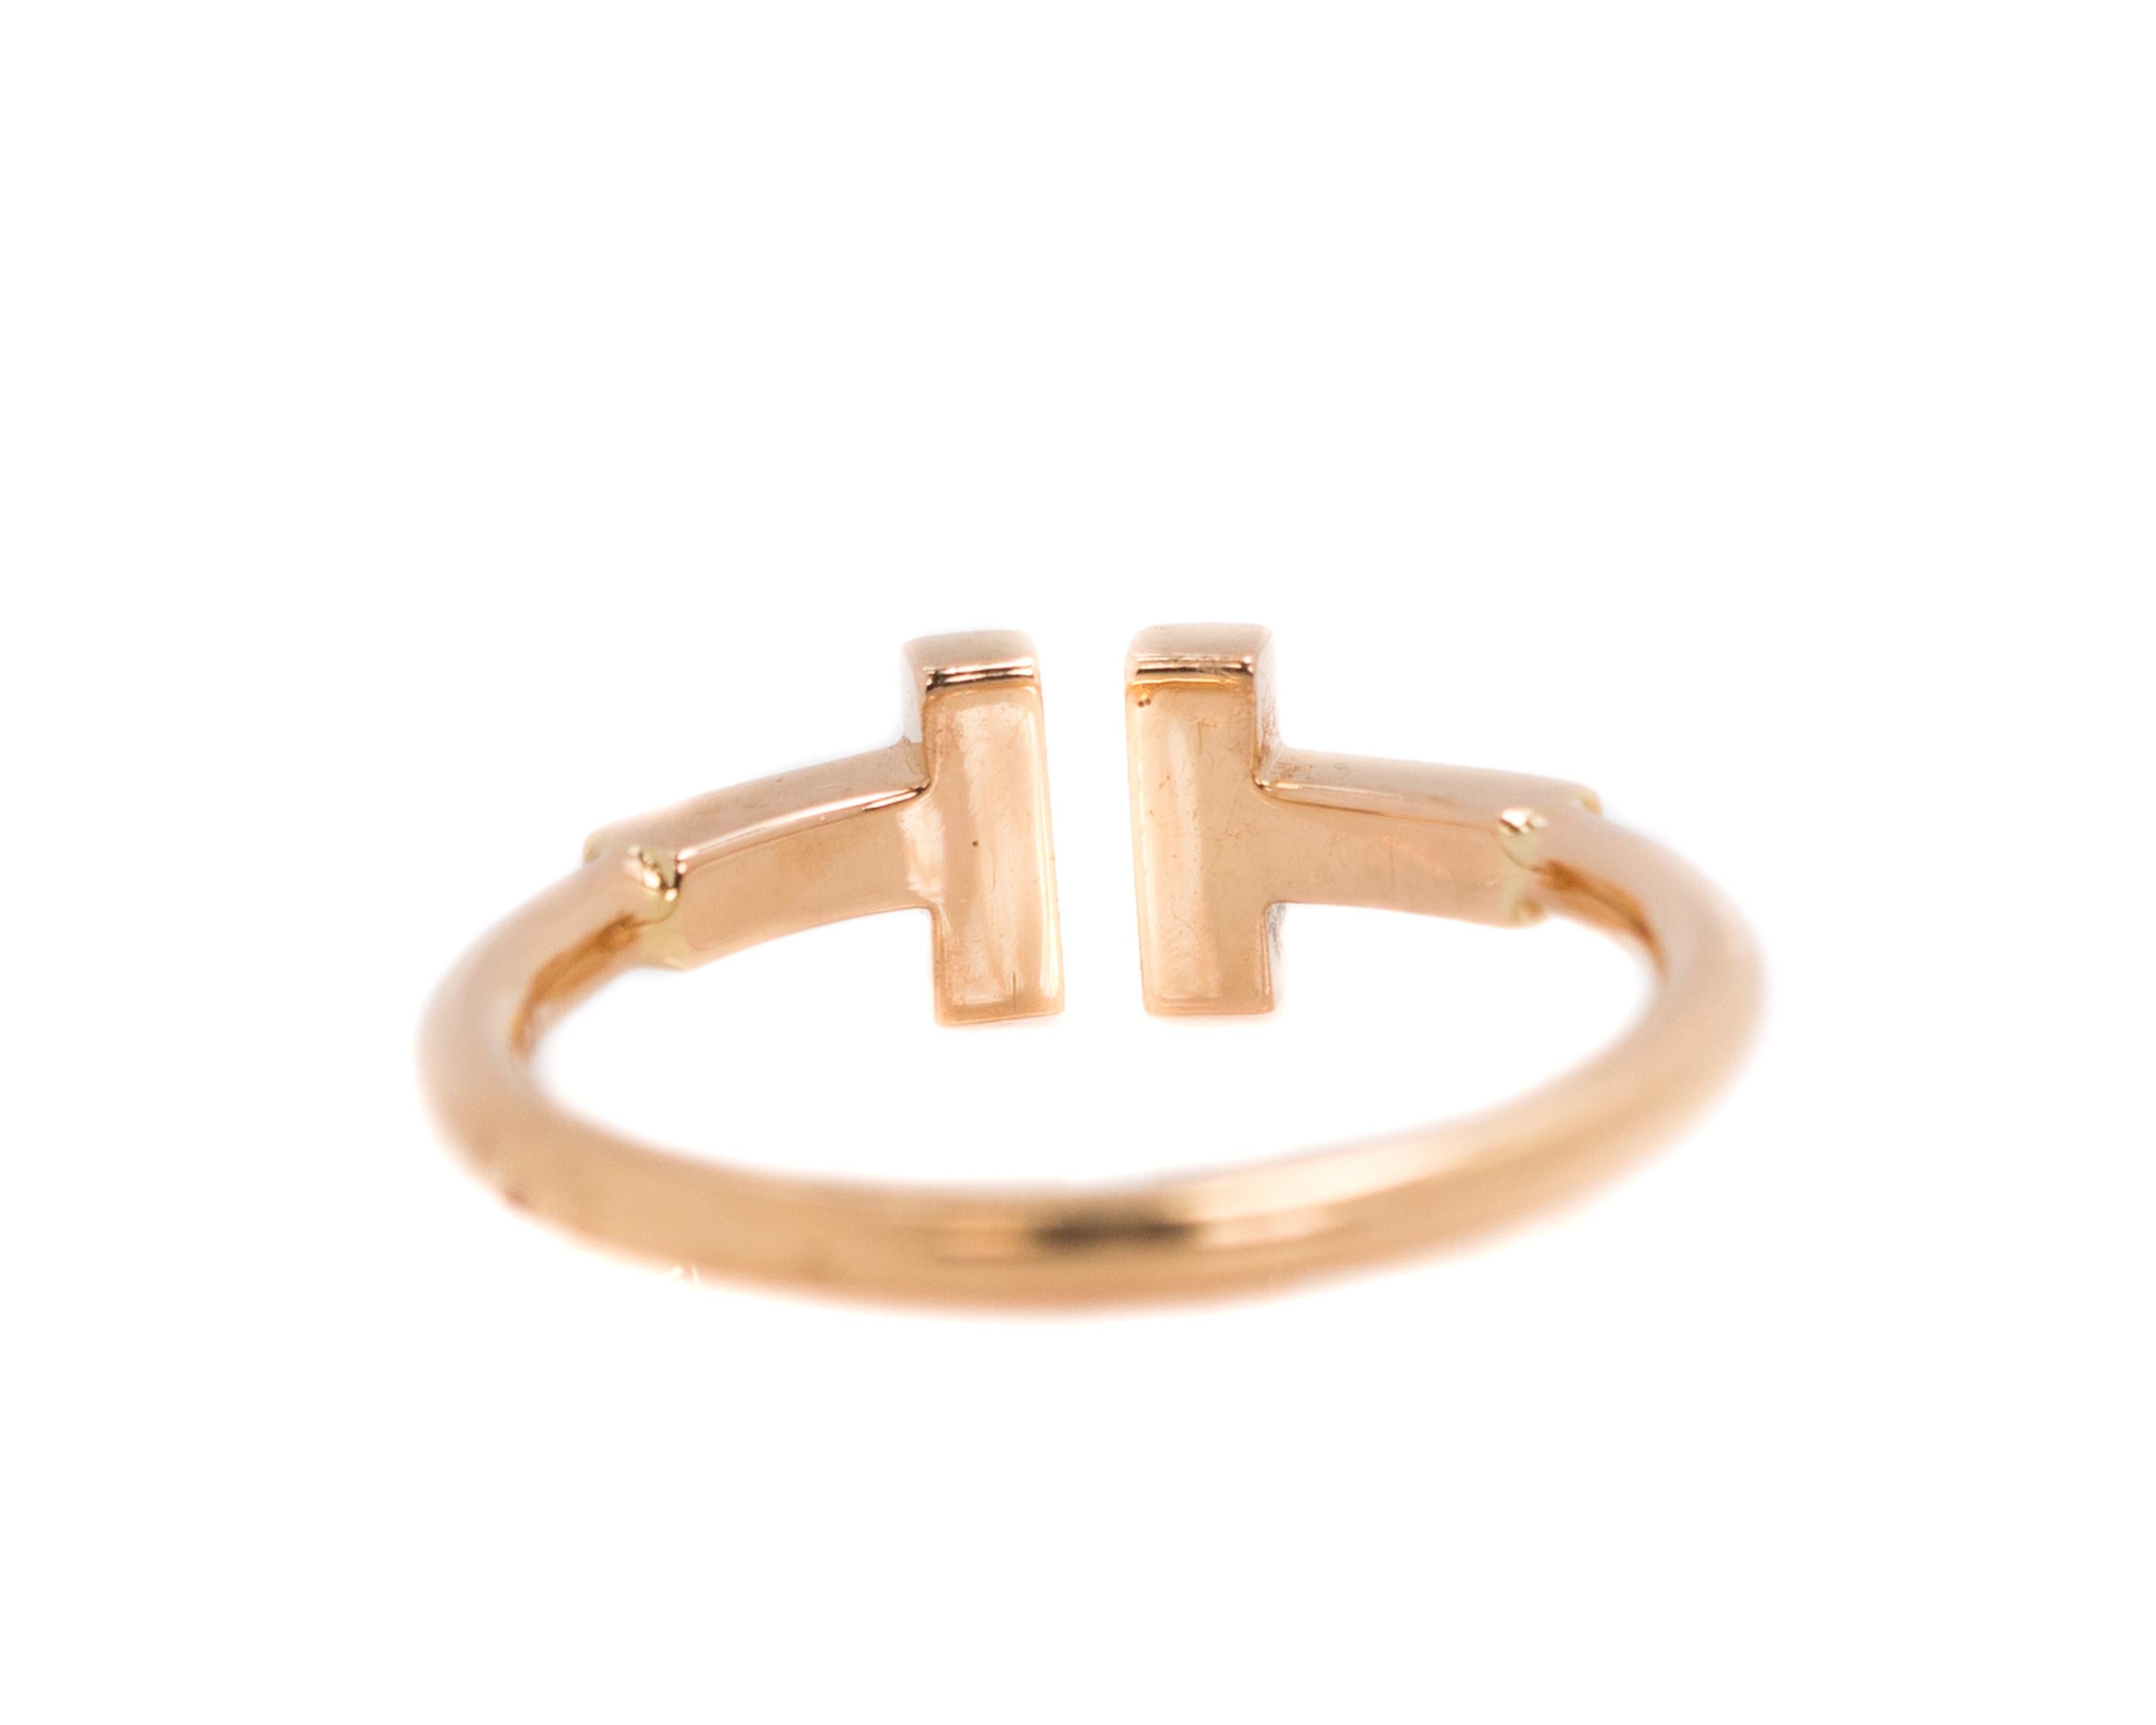 Tiffany & Co. 18 Karat Rose Gold Double T Design Wire Ring In Excellent Condition For Sale In Atlanta, GA